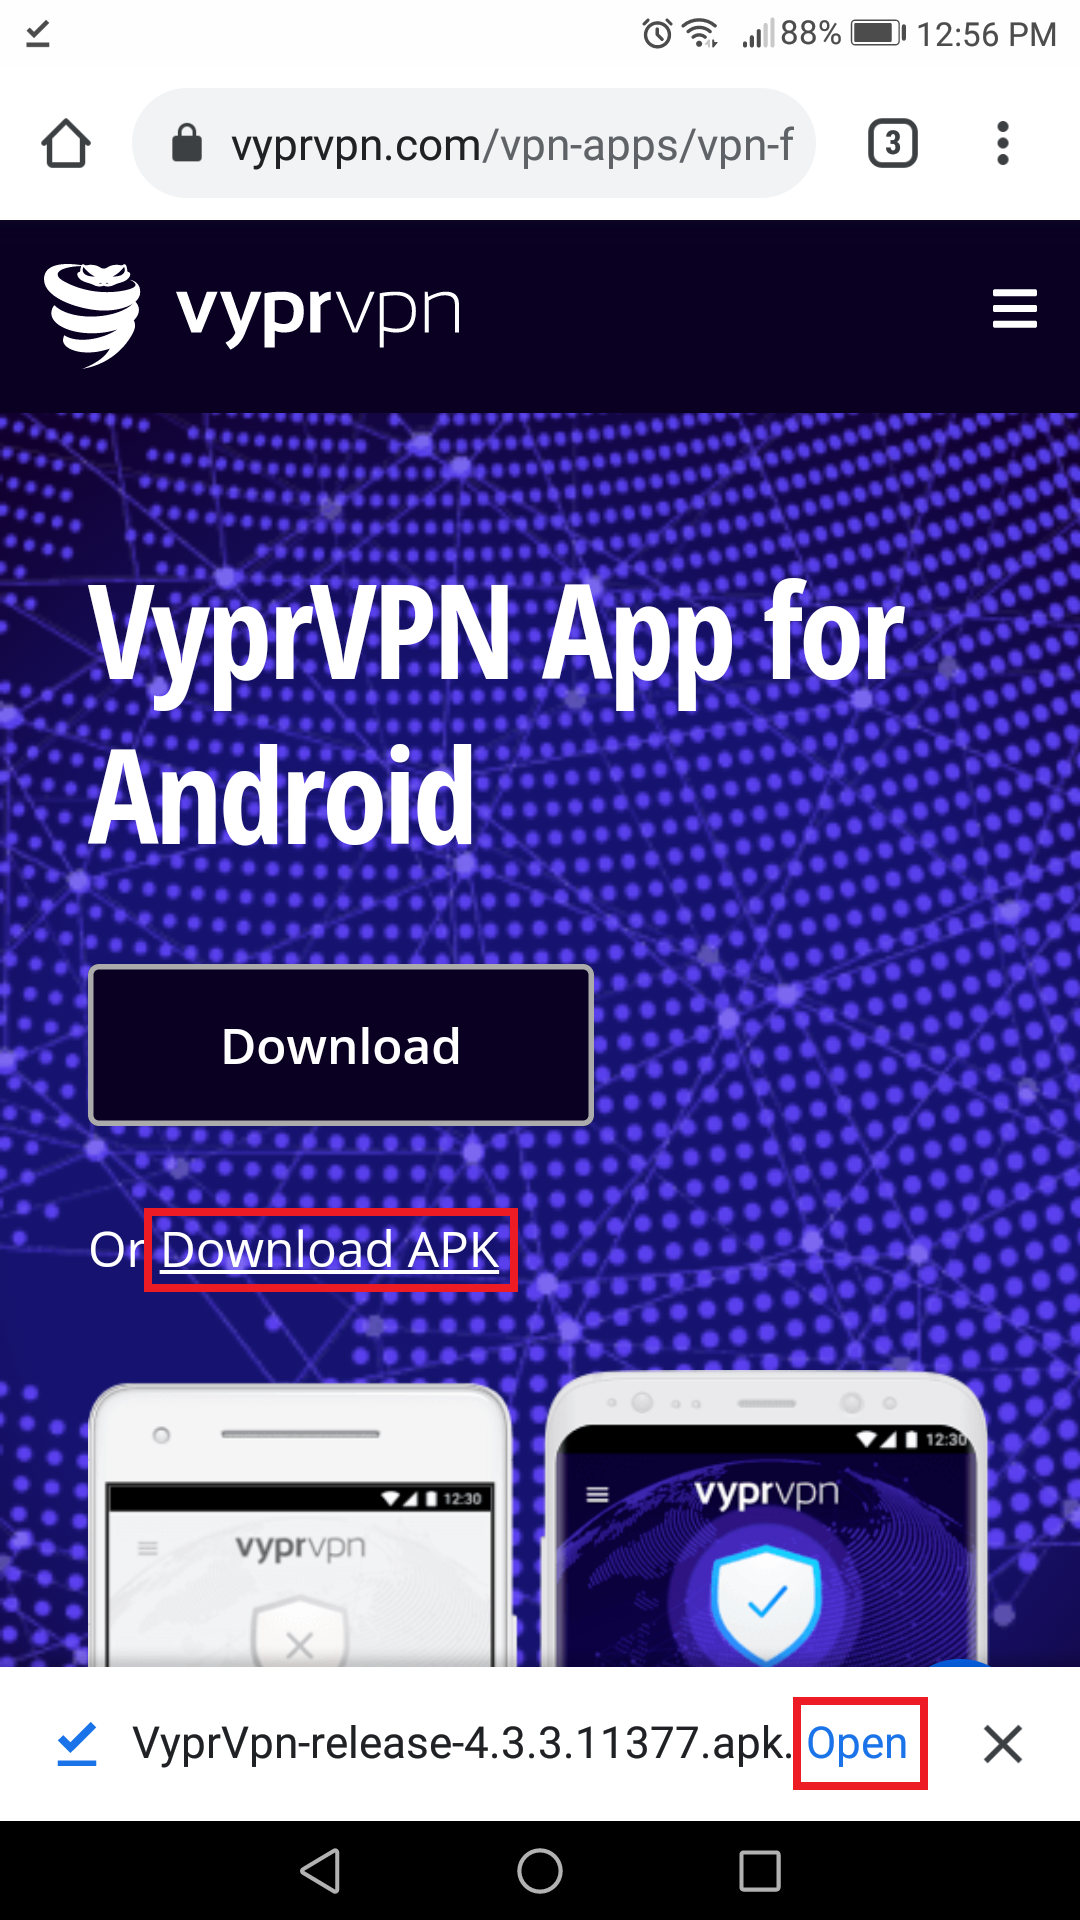 Vypr_Android_Page_-_Open_APK_Option_-_Download_APK_and_Open_Selected.png